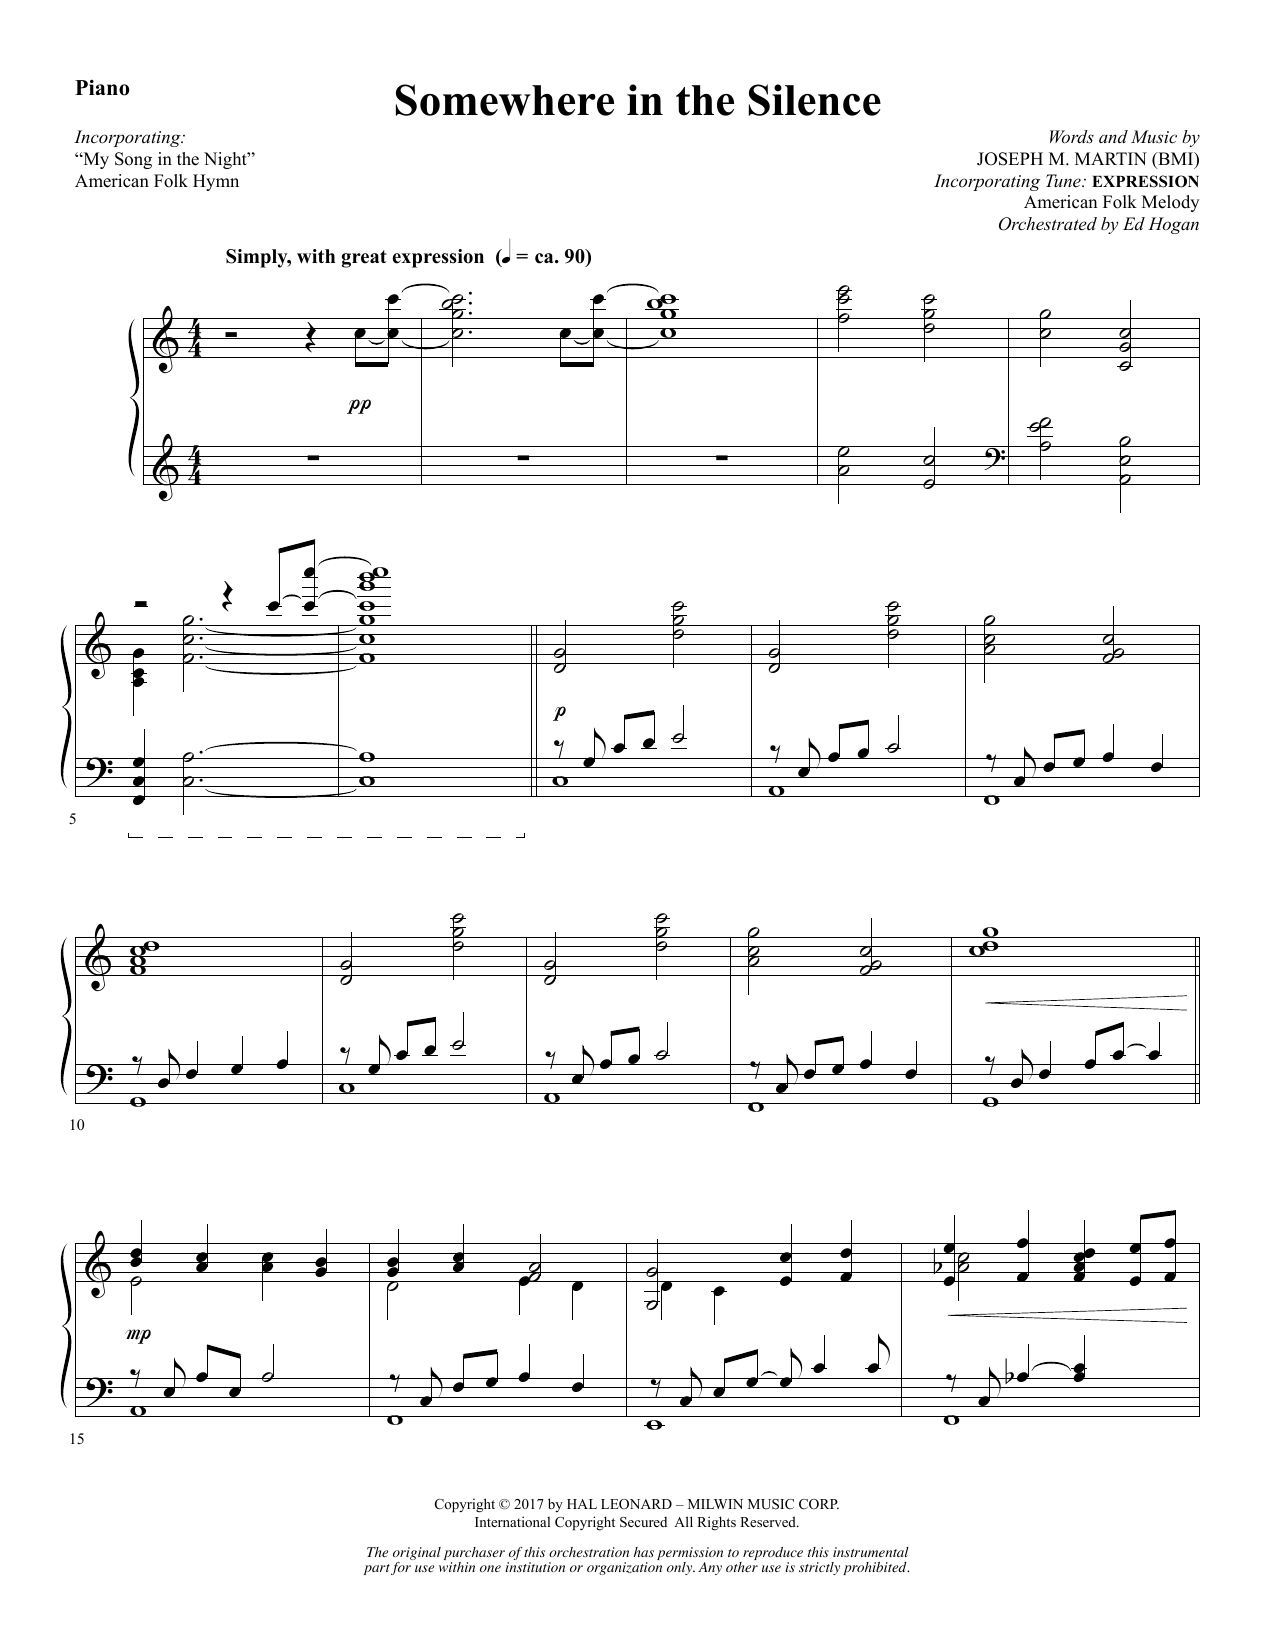 Download Joseph M. Martin Somewhere in the Silence - Piano Sheet Music